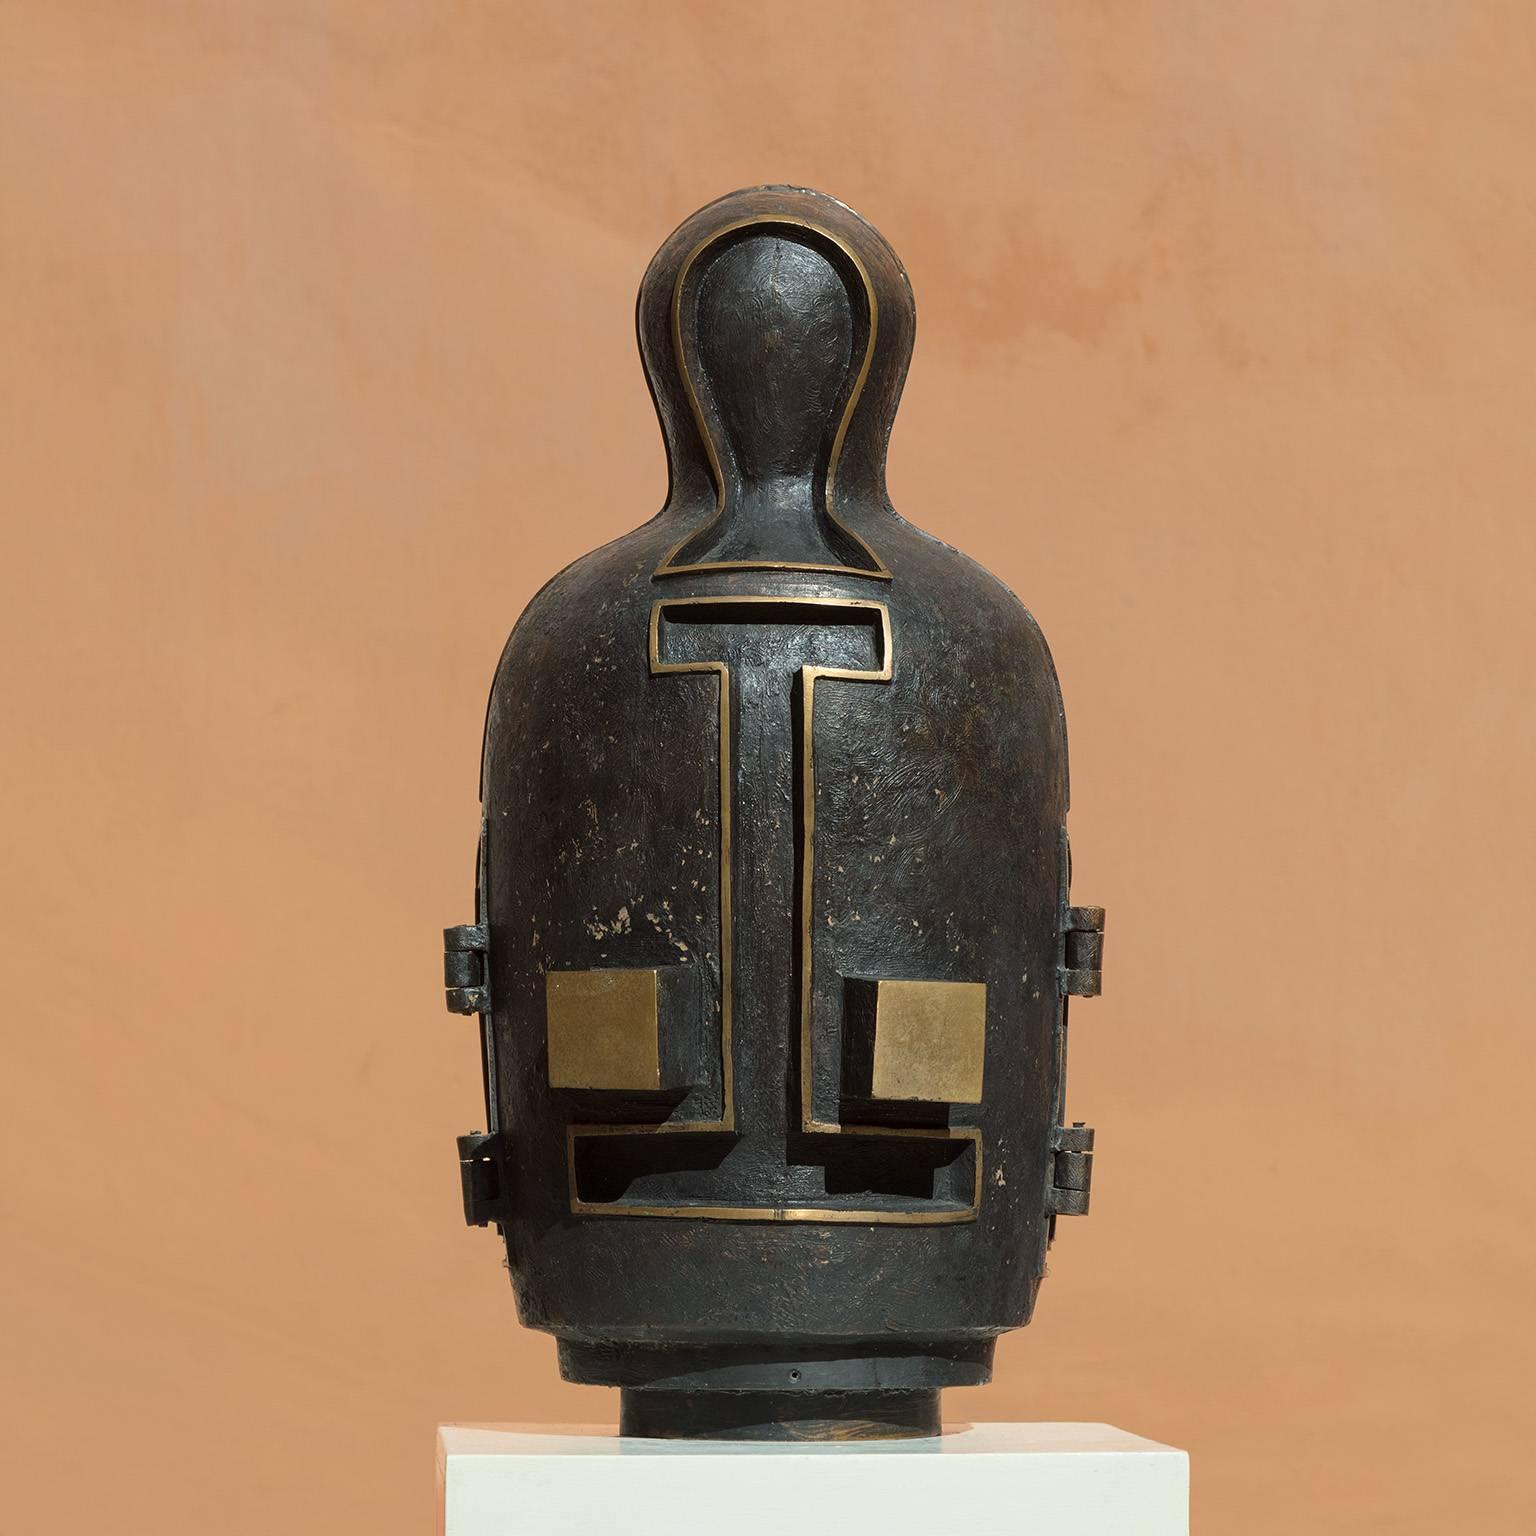 Canopo - Bronze Sculpture with Secret Compartments, Funerary Urn, Antropomorphic - Gold Figurative Sculpture by Angelo Canevari